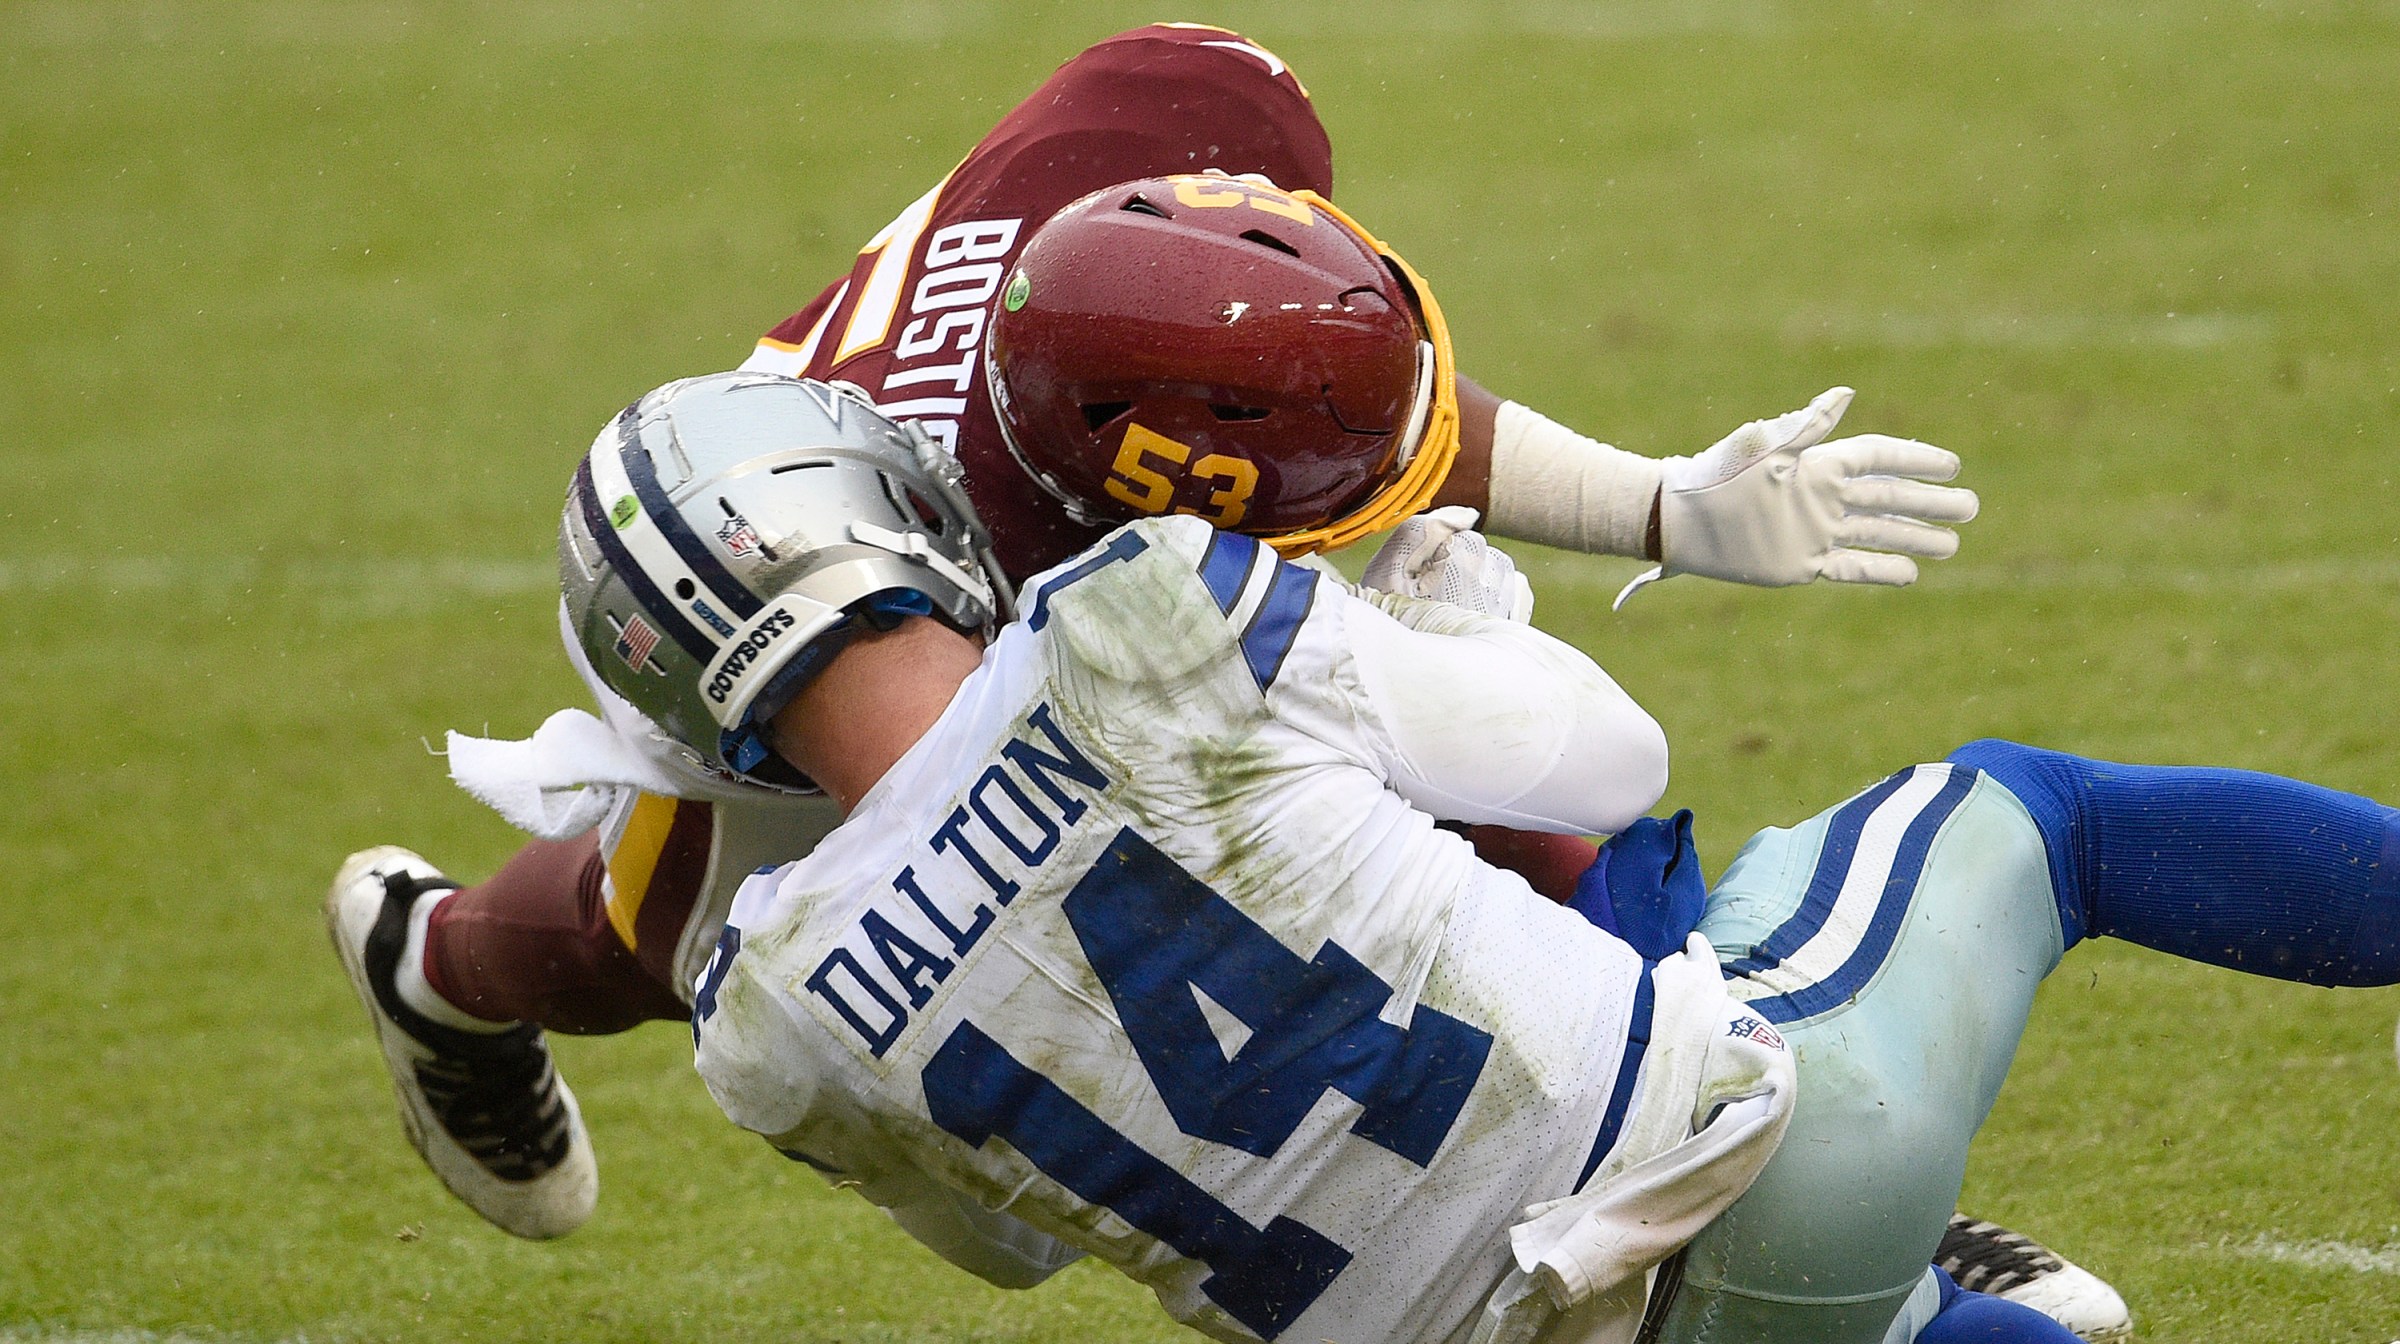 Quarterback Andy Dalton #14 of the Dallas Cowboys is hit and injured by Jon Bostic #53 of the Washington Football Team in the third quarter of the game at FedExField on October 25, 2020